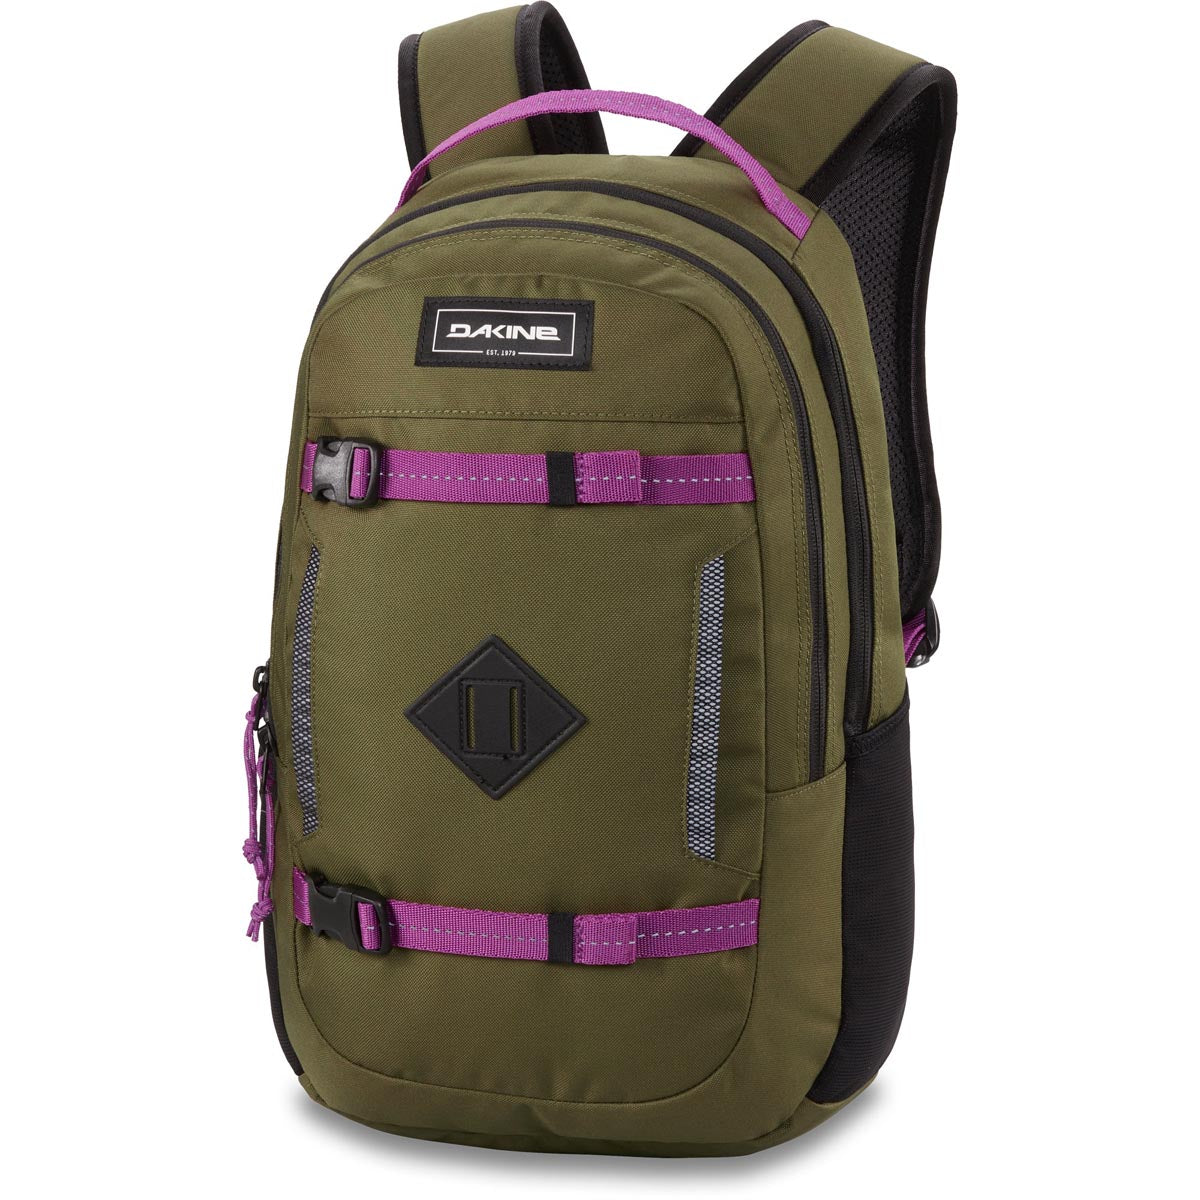 Dakine Youth Mission 18l Backpack - Jungle Punch image 1